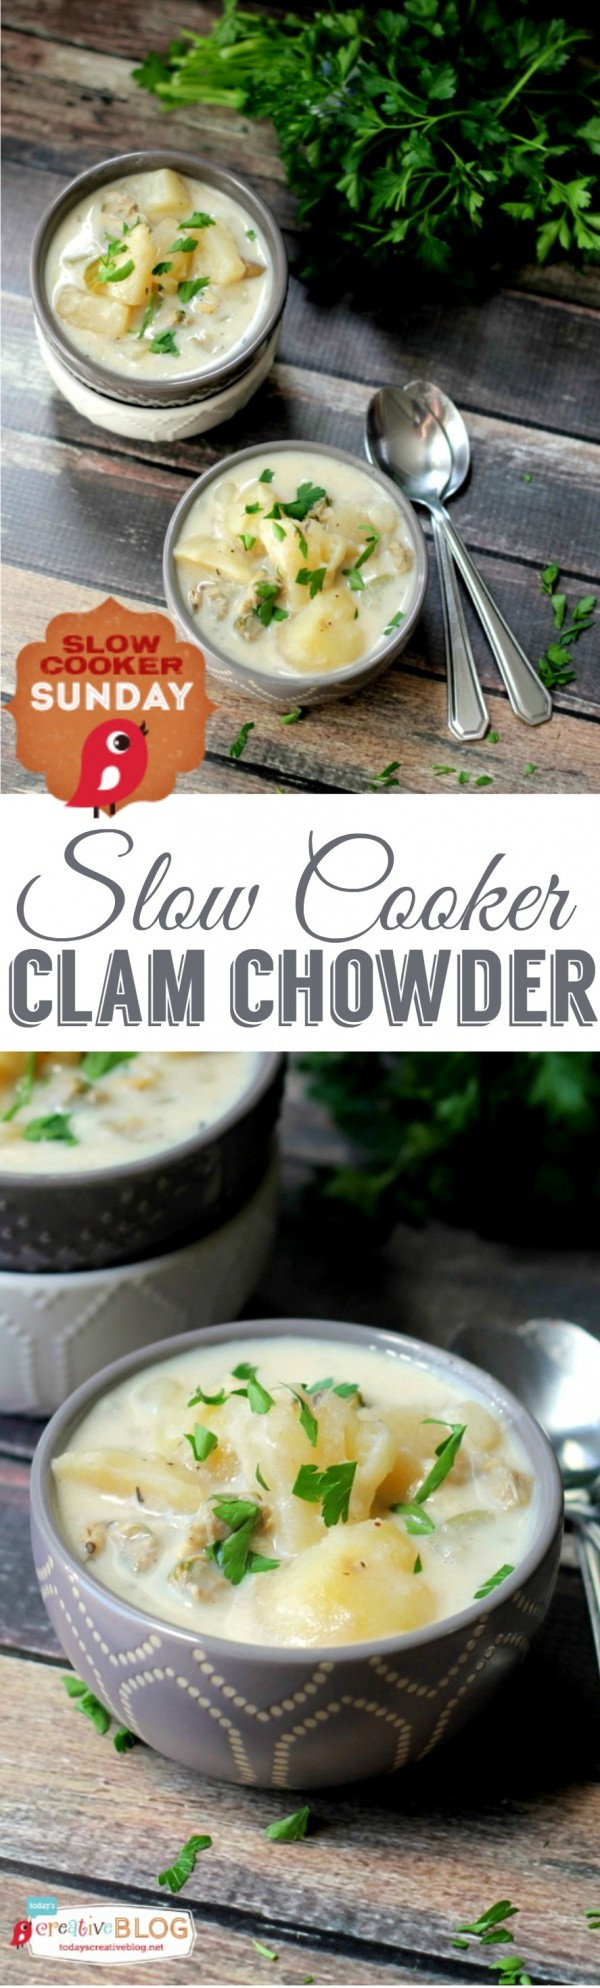 Clam Chowder Recipe Slow Cooker
 Slow Cooker Clam Chowder Today s Creative Life